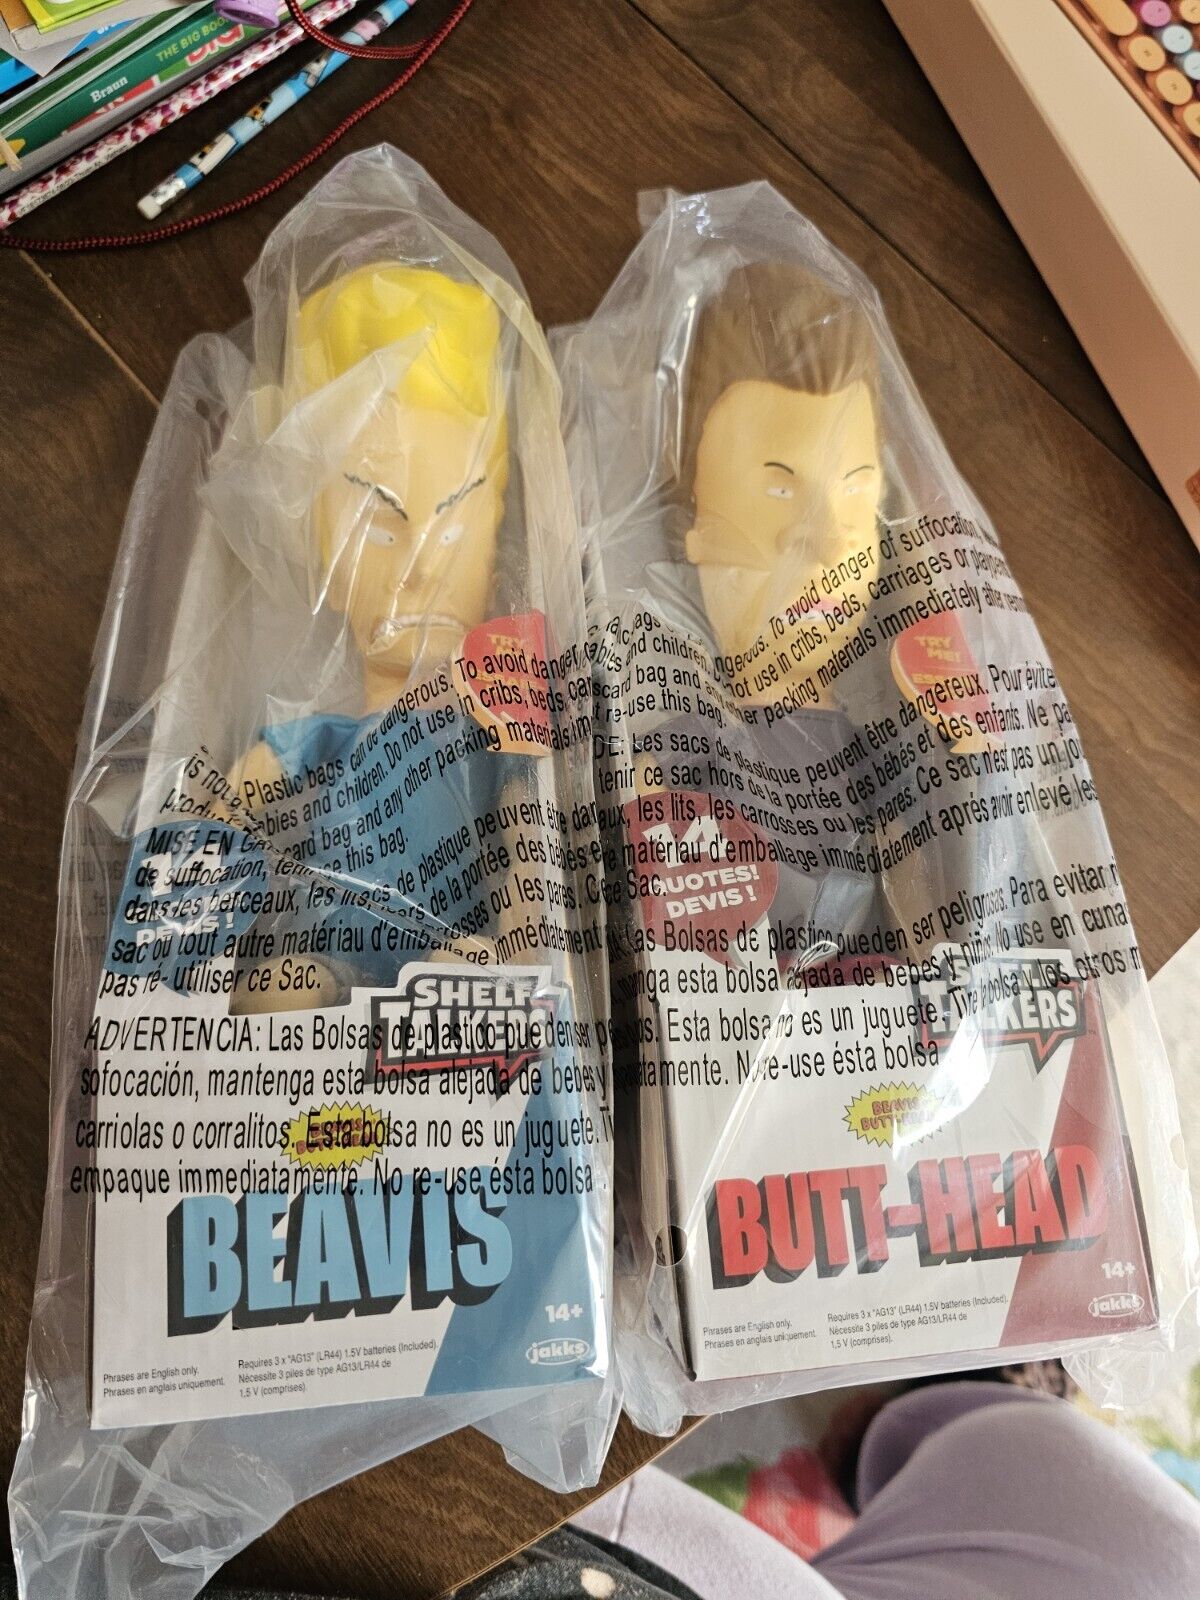 Beavis And Butthead Set Pull String Talking Doll Figures 12in Shelf Talkers New